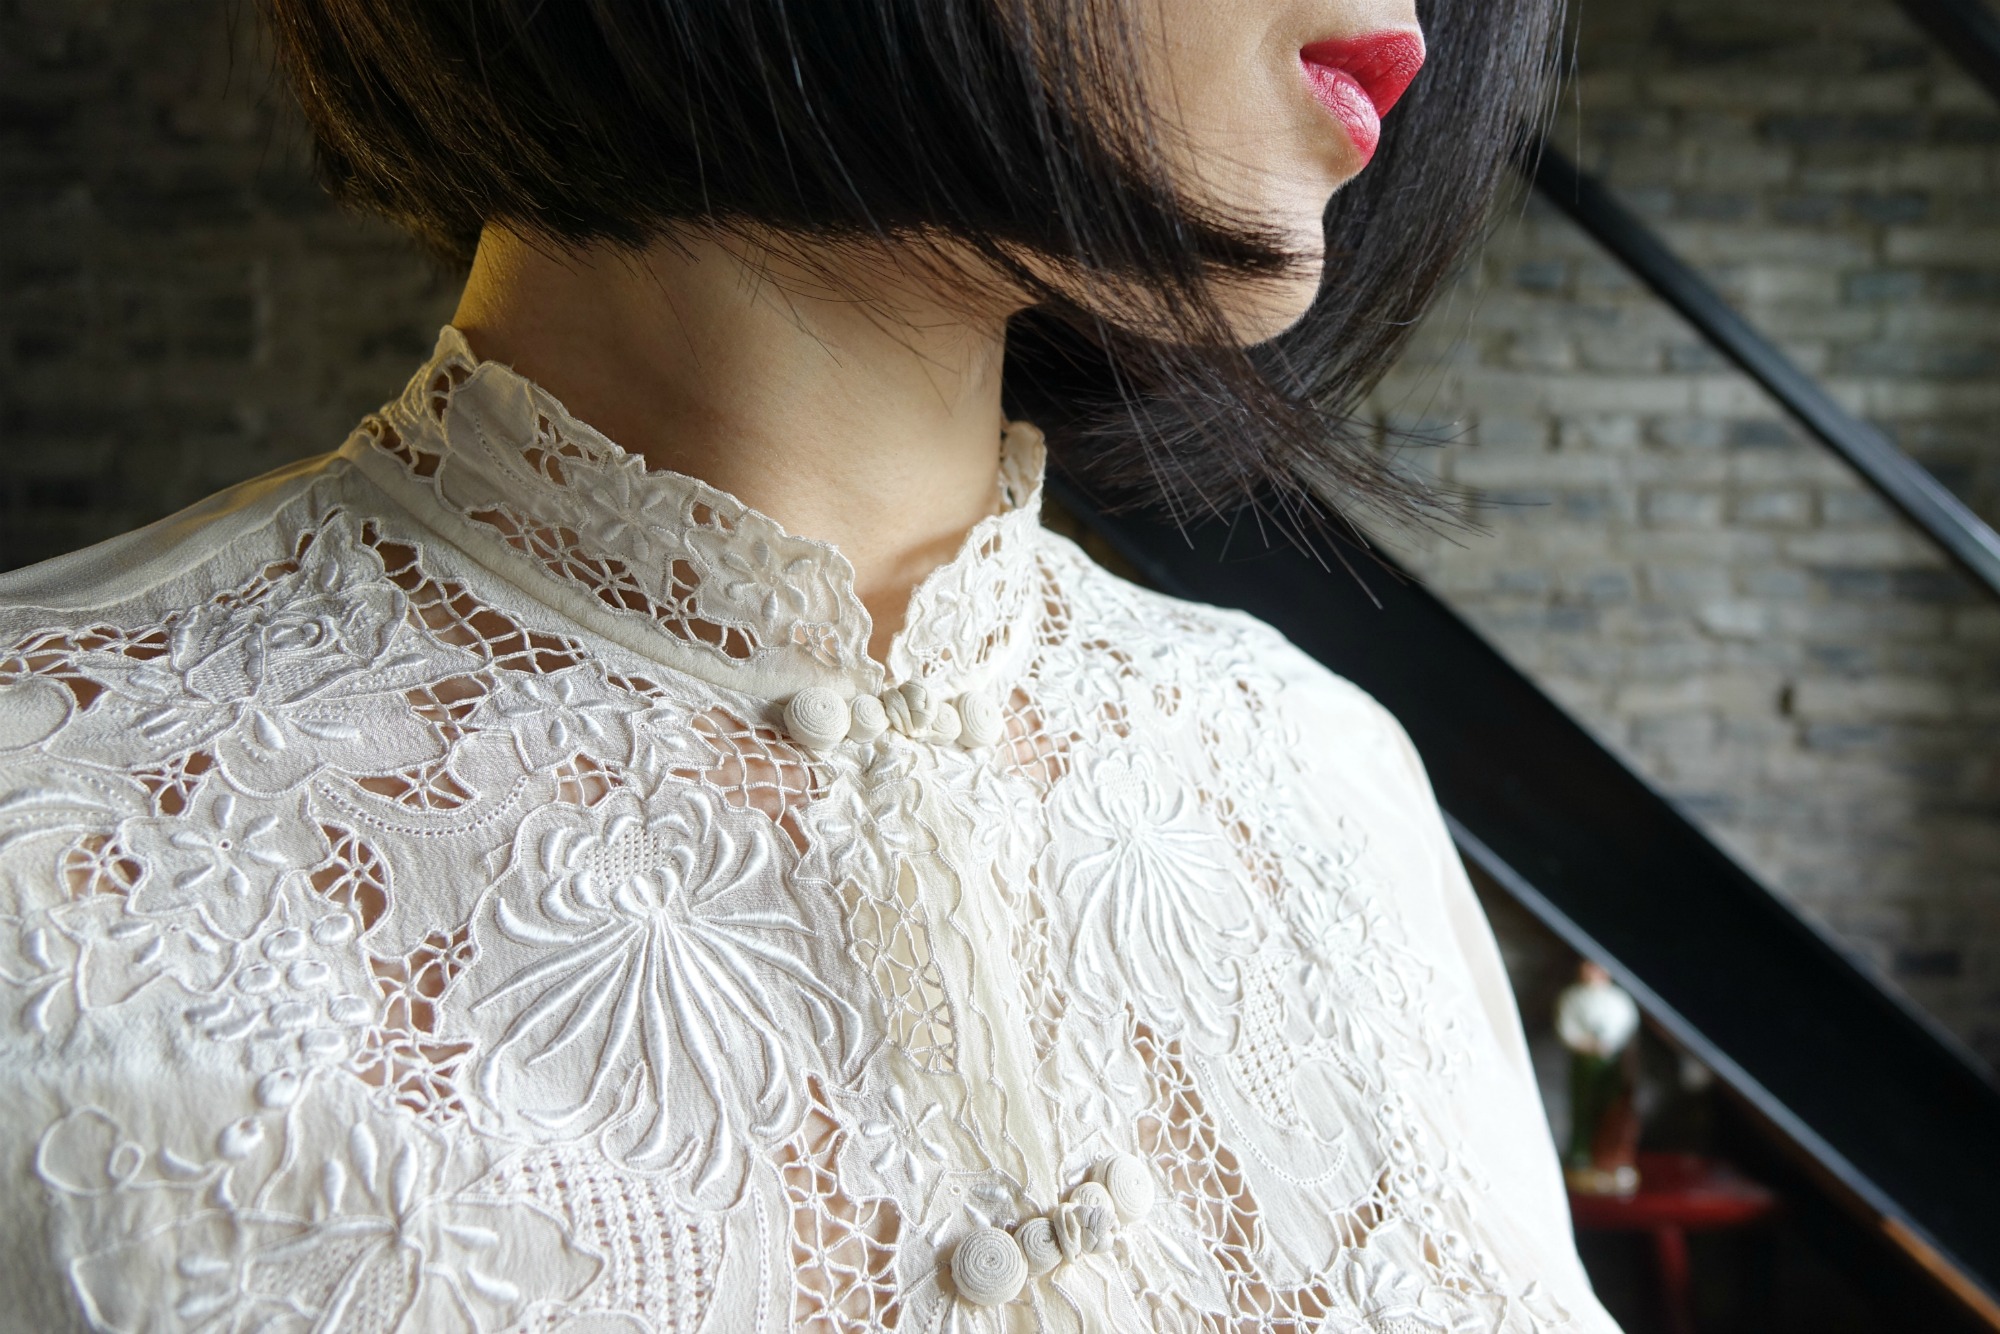 Vintage chic with an embroidered qipao (cheongsam) blouse